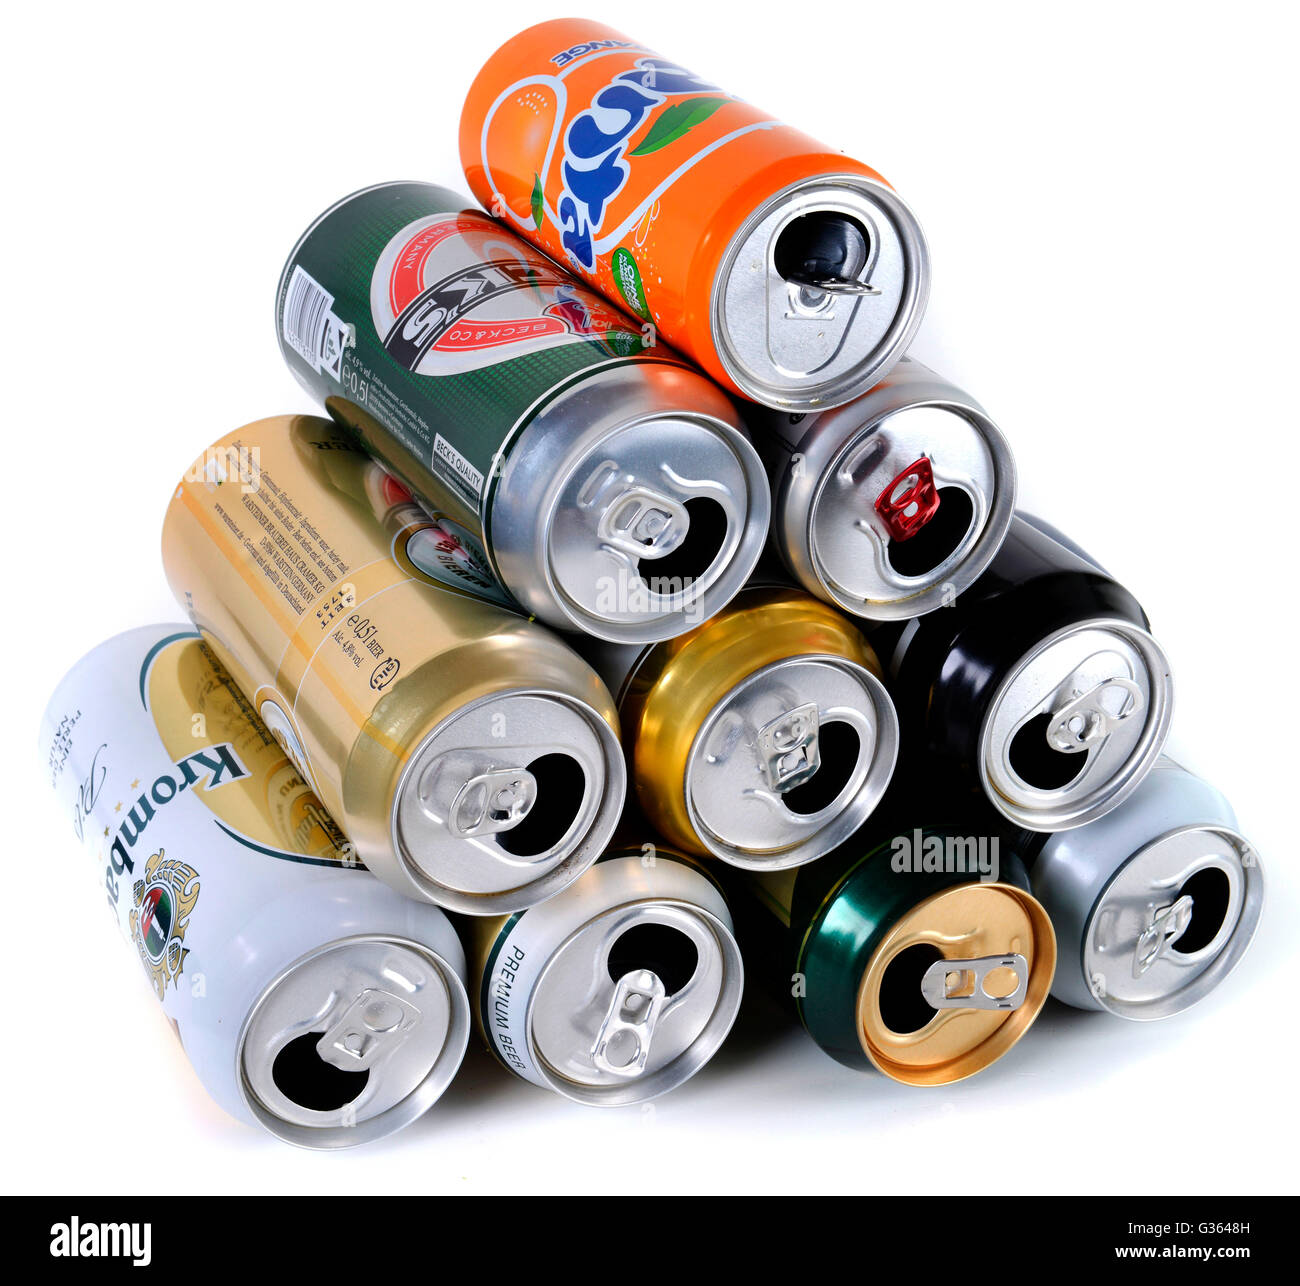 Tin can, drink can, drink cans, beer can, beer cans Stock Photo